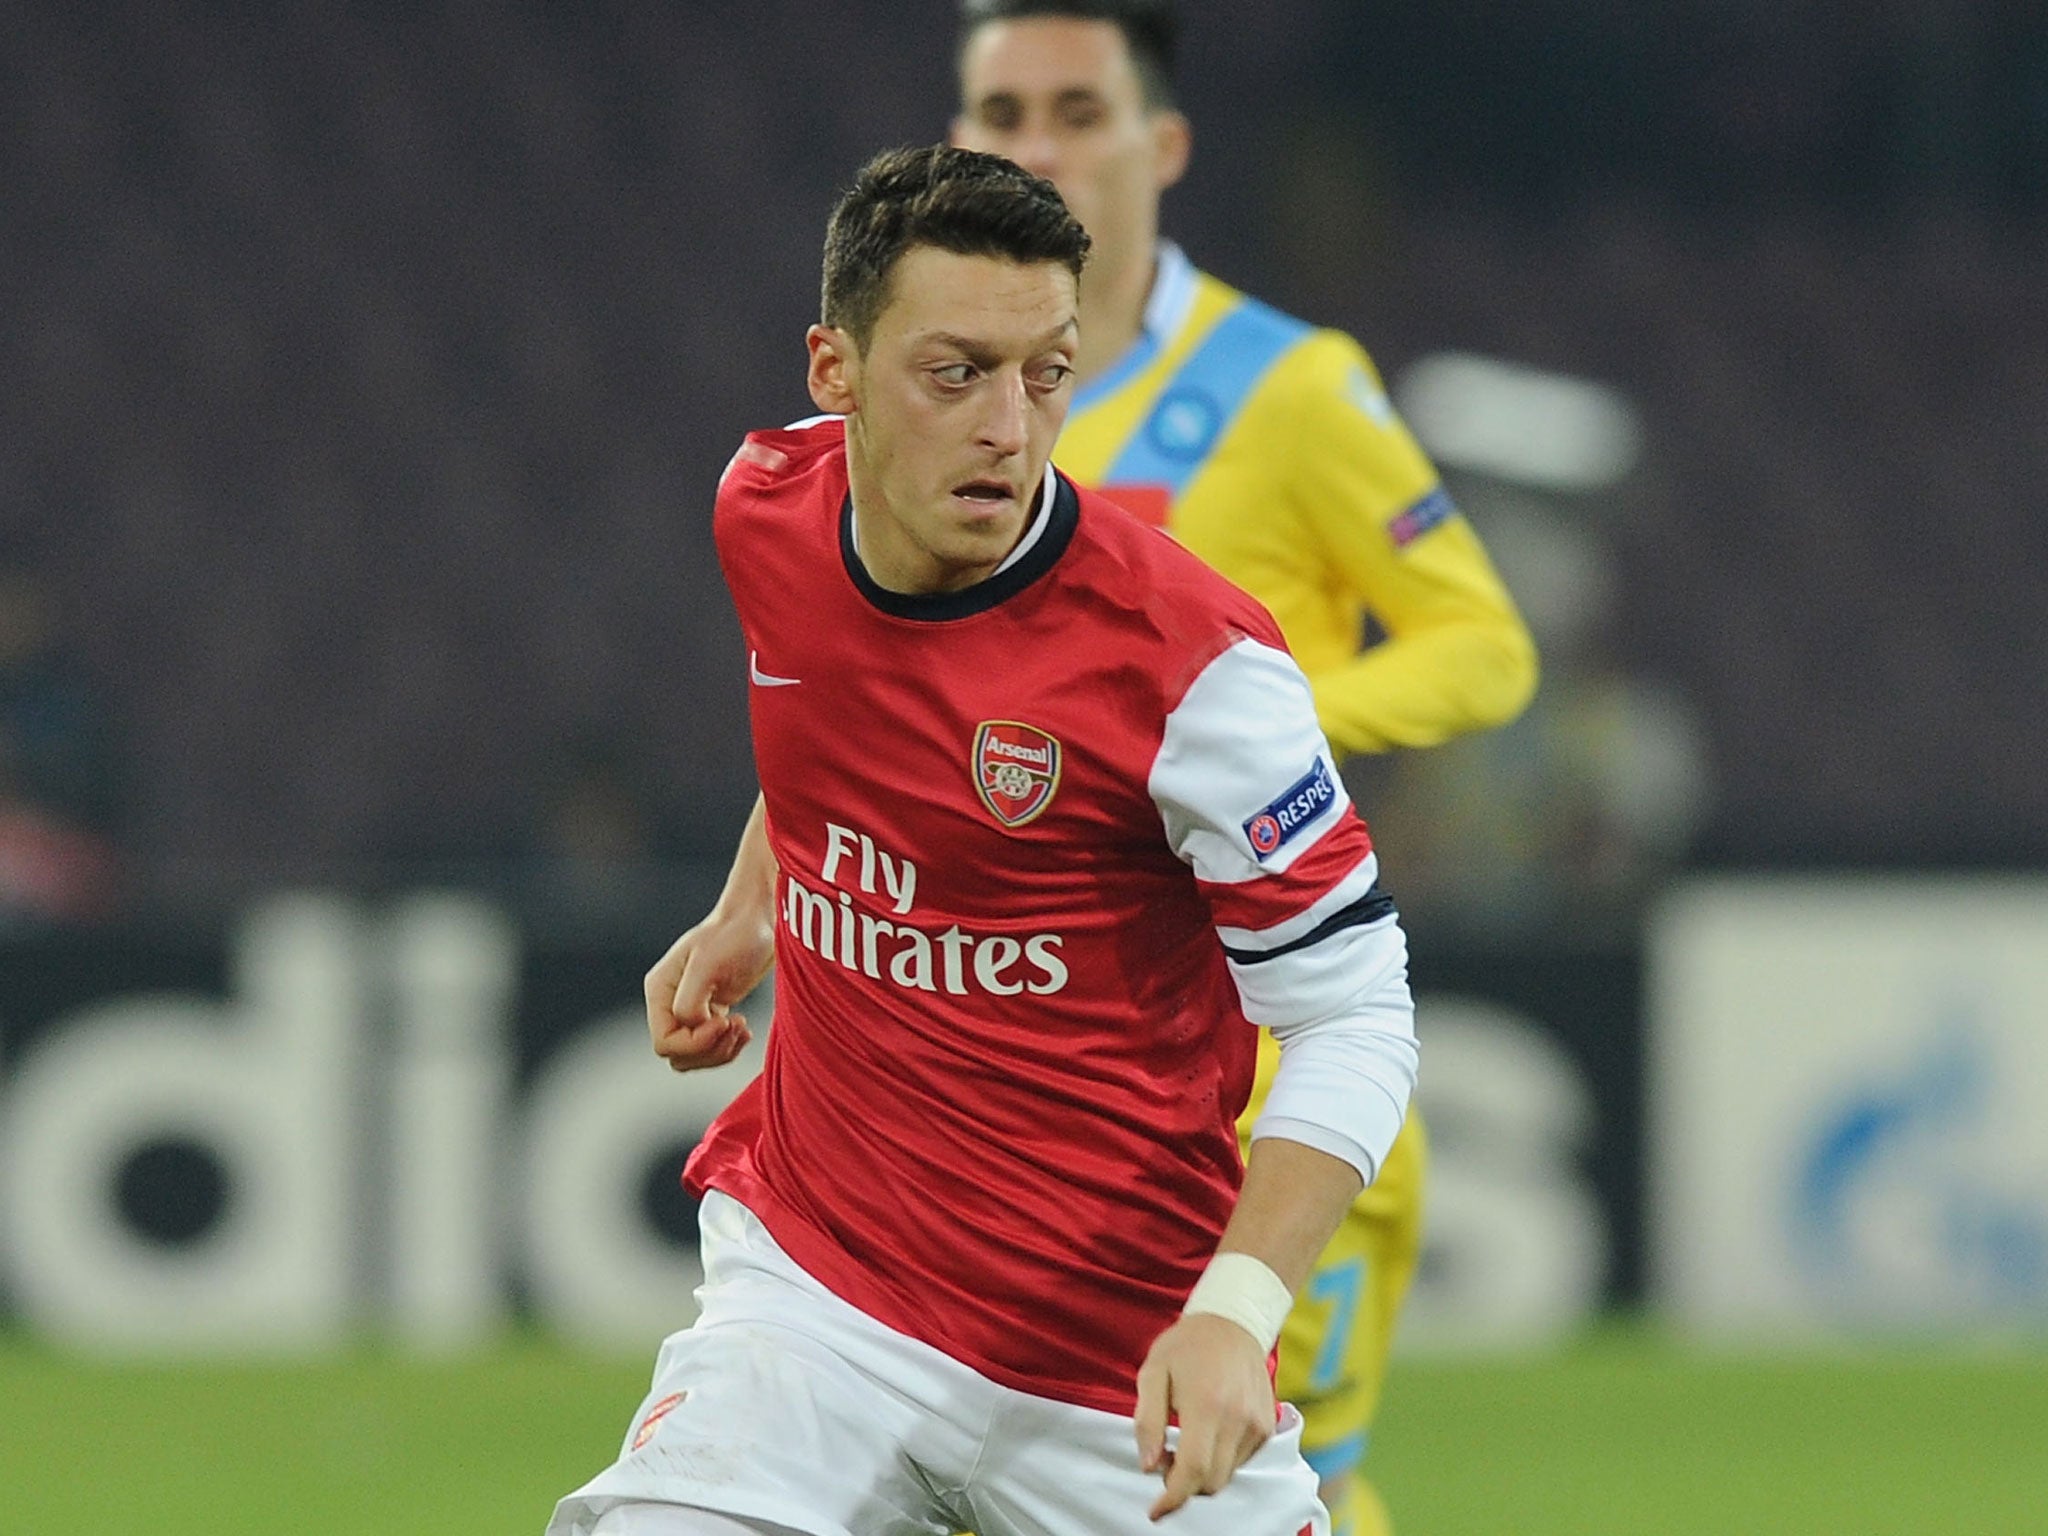 Mesut Ozil turns on the ball during Arsenal's 2-0 defeat against Napoli on Wednesday